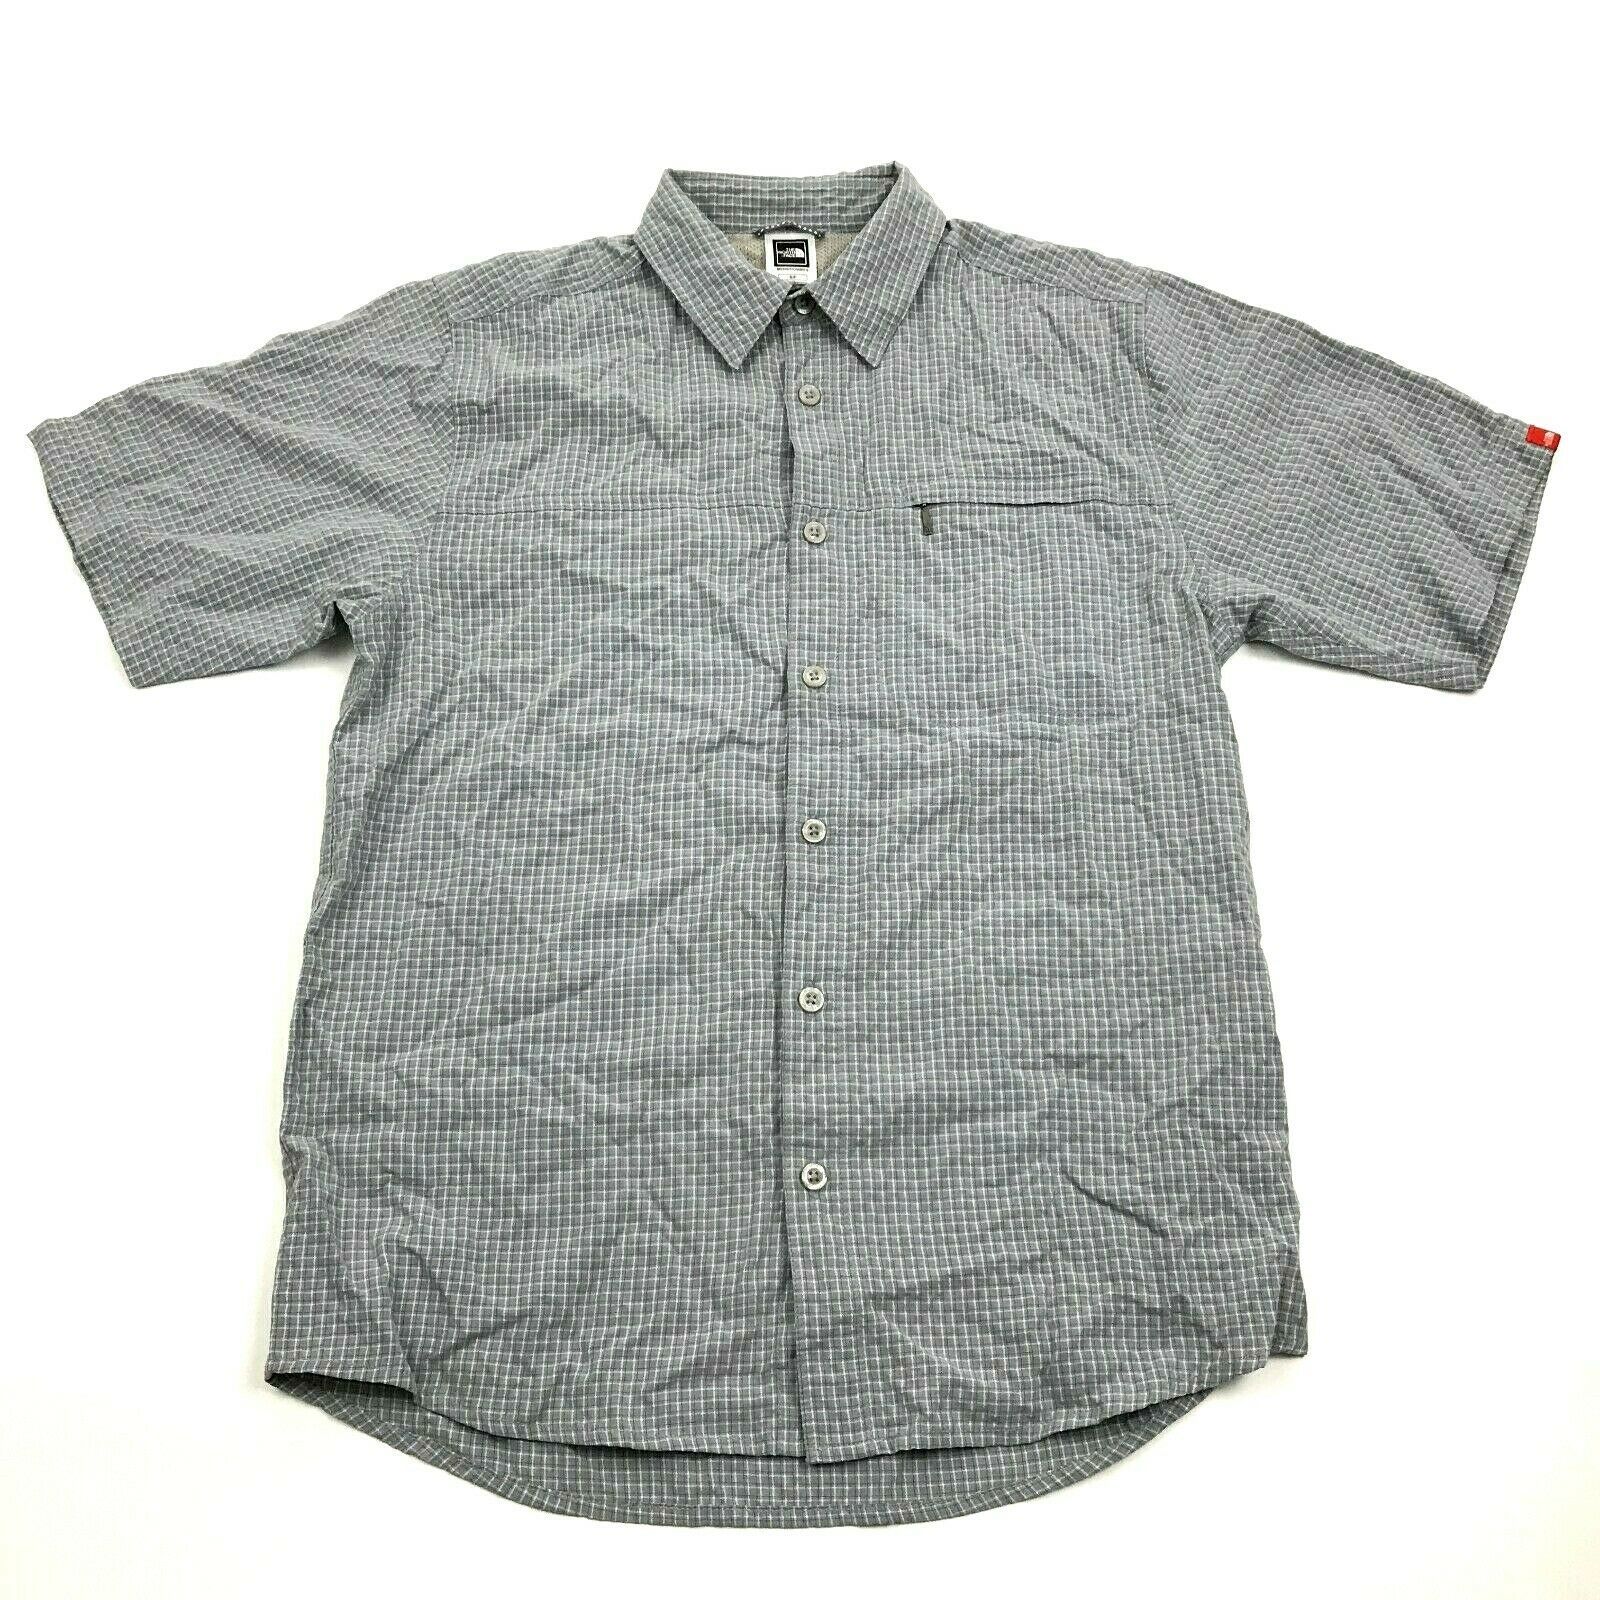 The North Face Button Up Shirt Men's Size Small S Gray Short Sleeve Zip ...